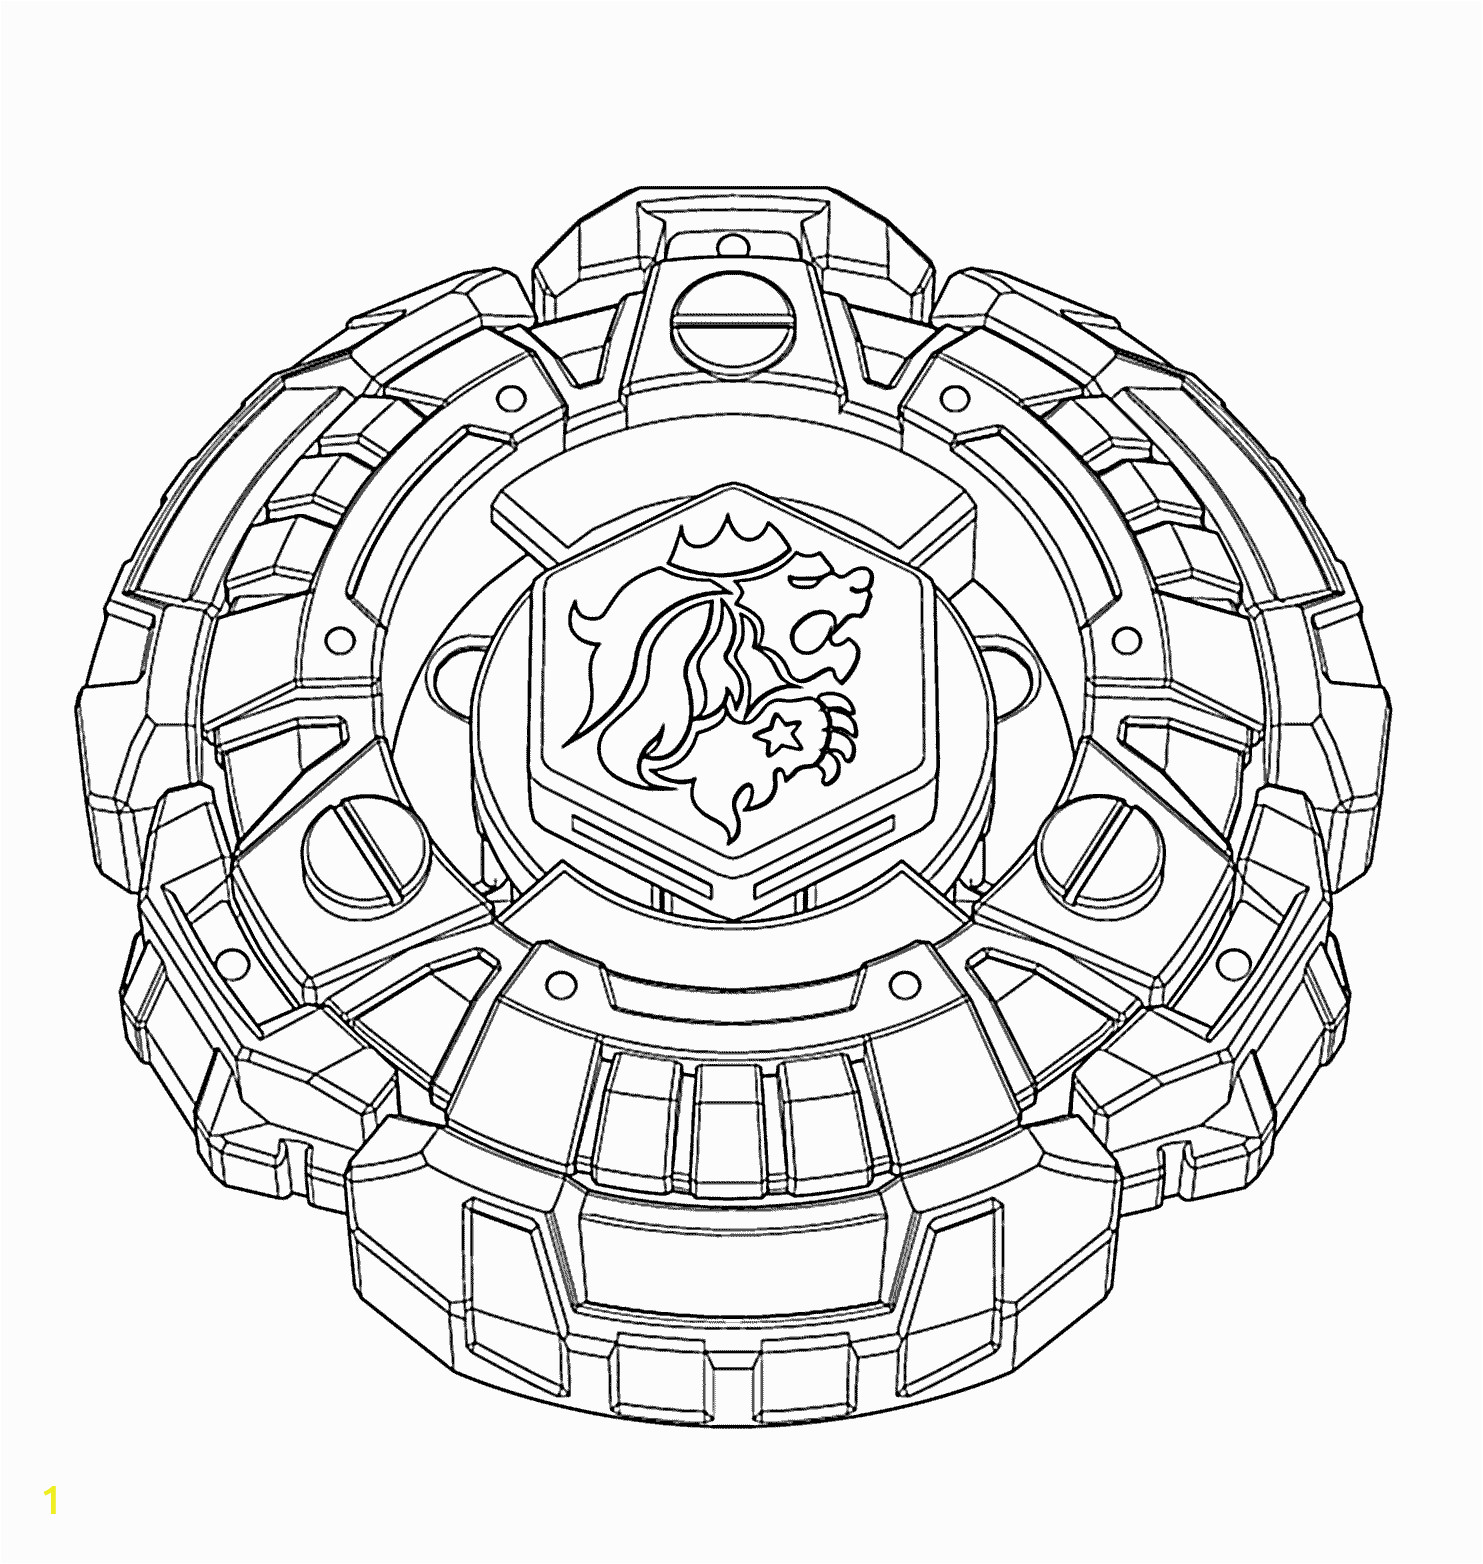 Beyblade Metal Fusion Coloring Pages to Print Beyblade Anime Coloring Pages for Kids Printable Free